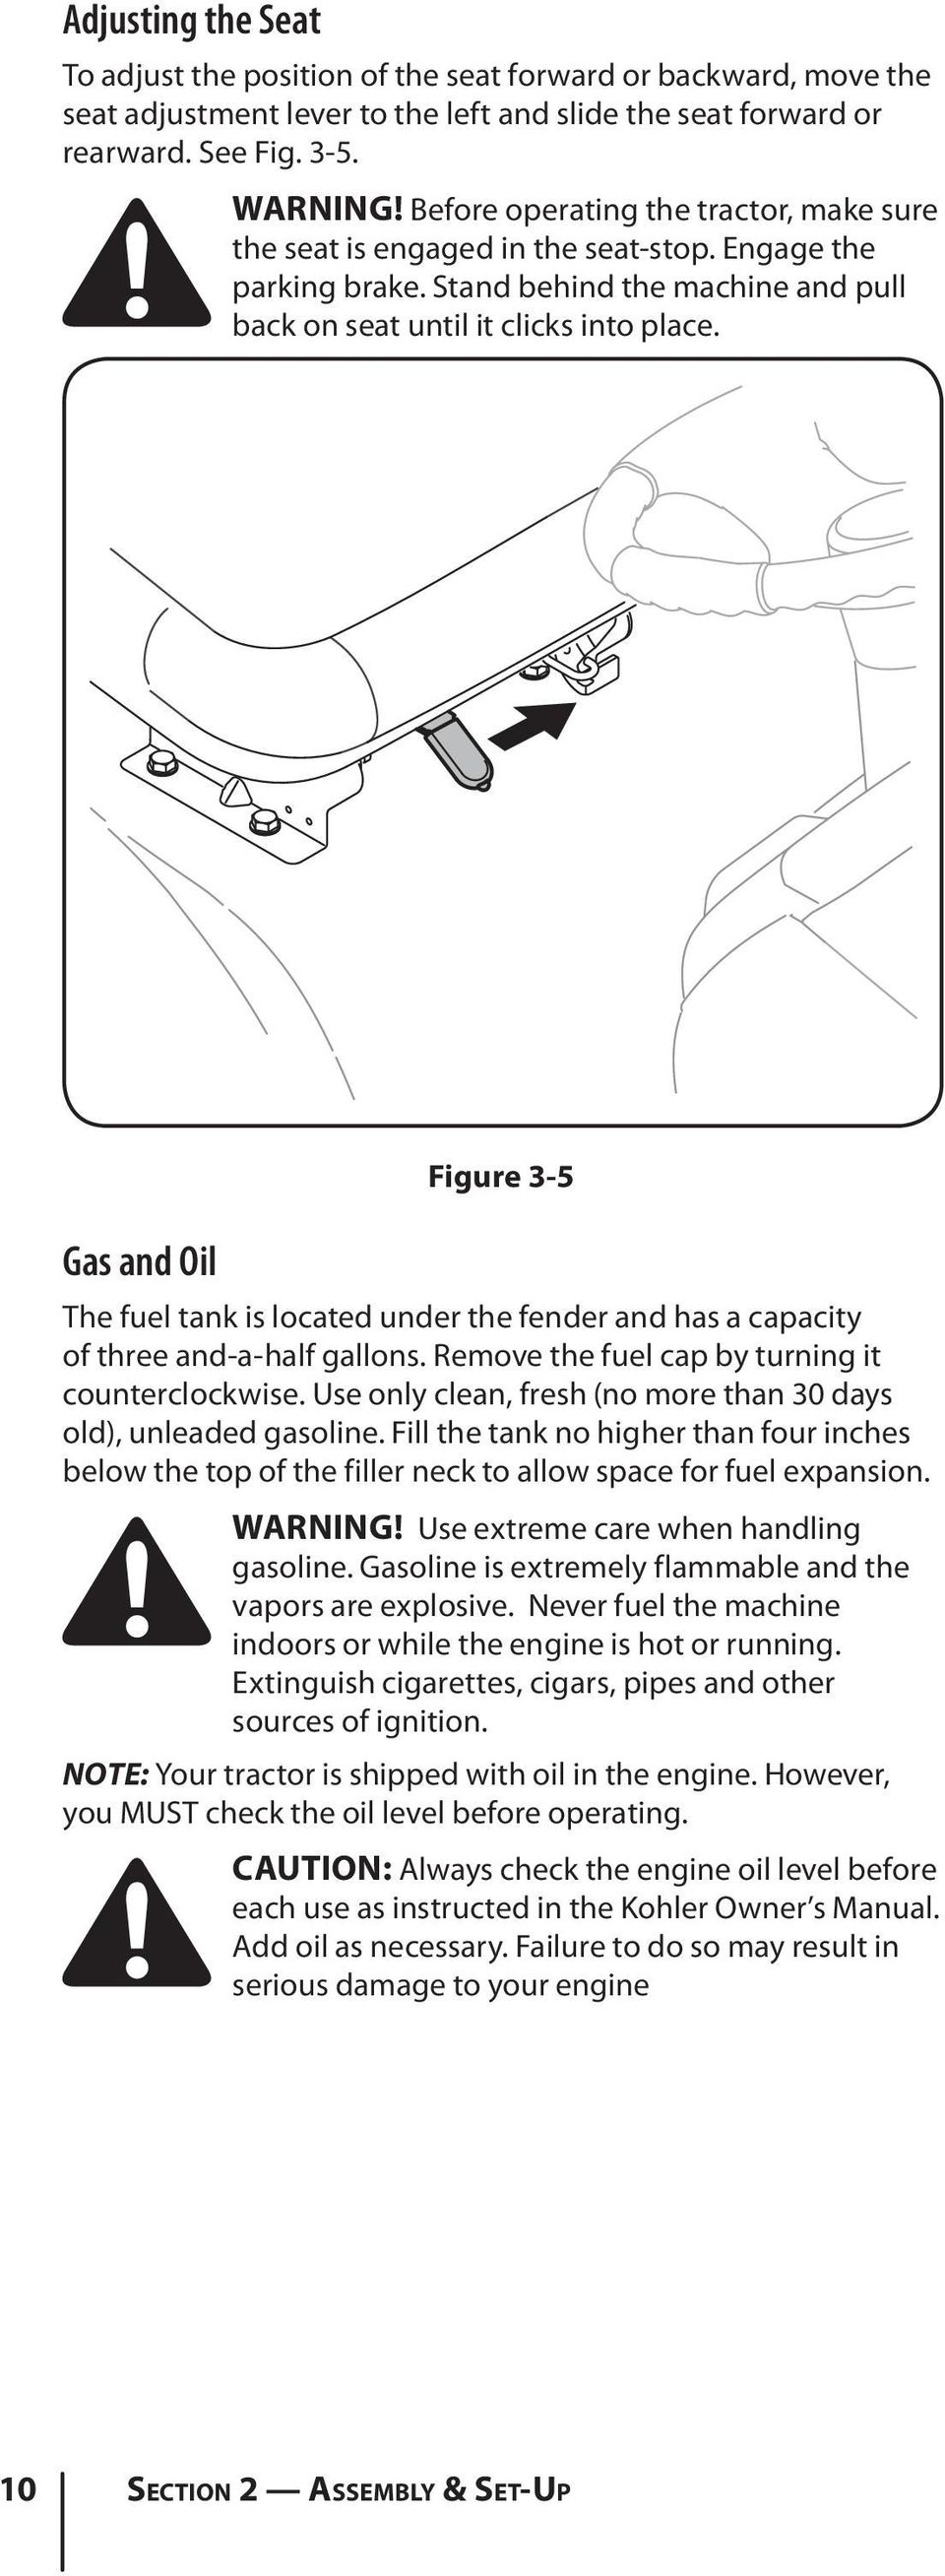 Gas and Oil Figure 3-5 The fuel tank is located under the fender and has a capacity of three and-a-half gallons. Remove the fuel cap by turning it counterclockwise.